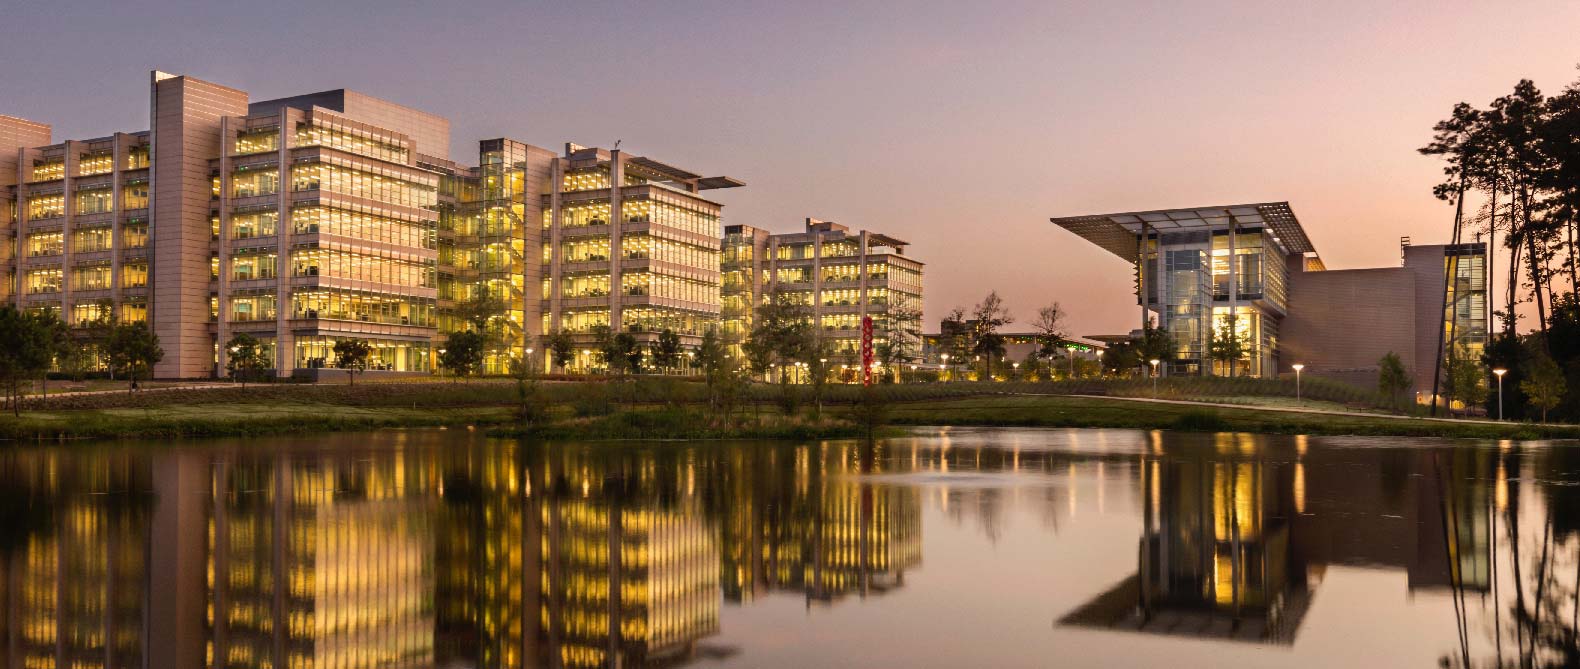 campus of large office complex with Lutron smart building lighting solutions